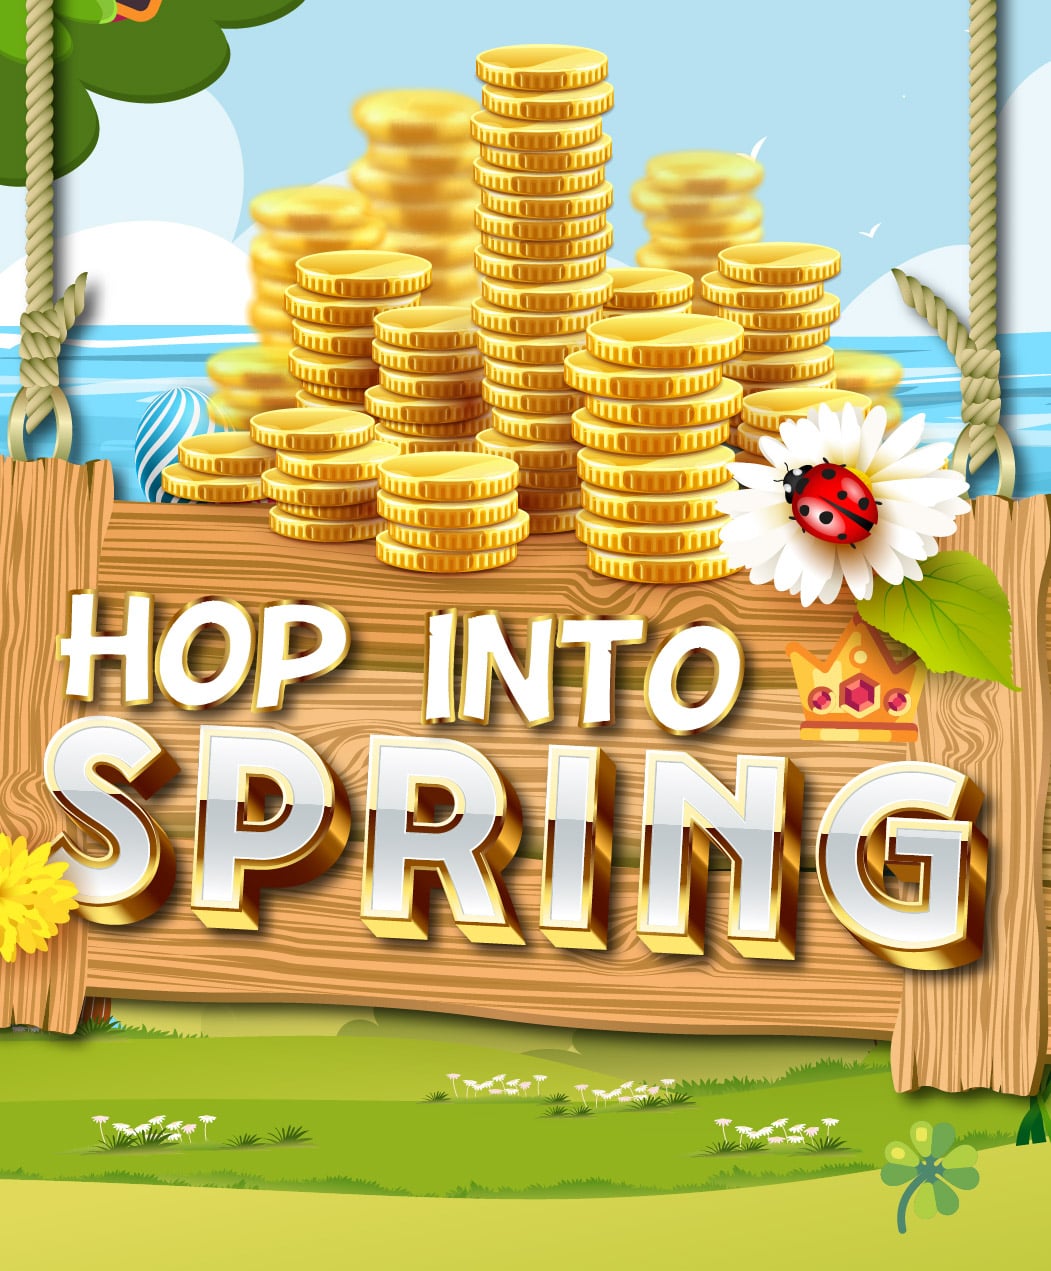 Hop Into Spring promotion at the lake house